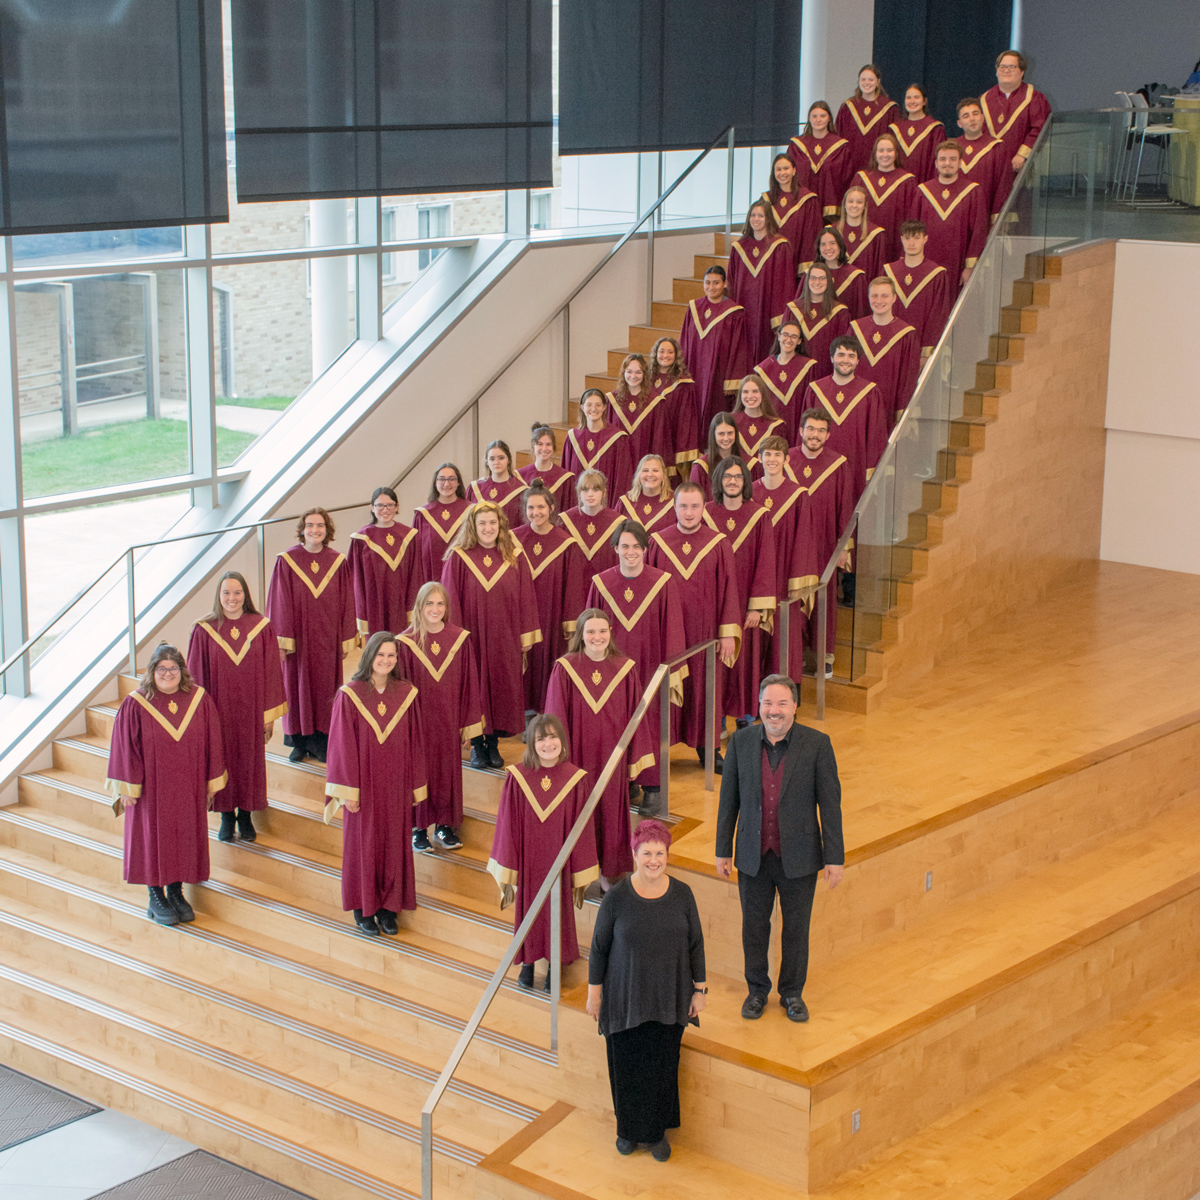 group photo of the Walsh Chorale on a stairwell